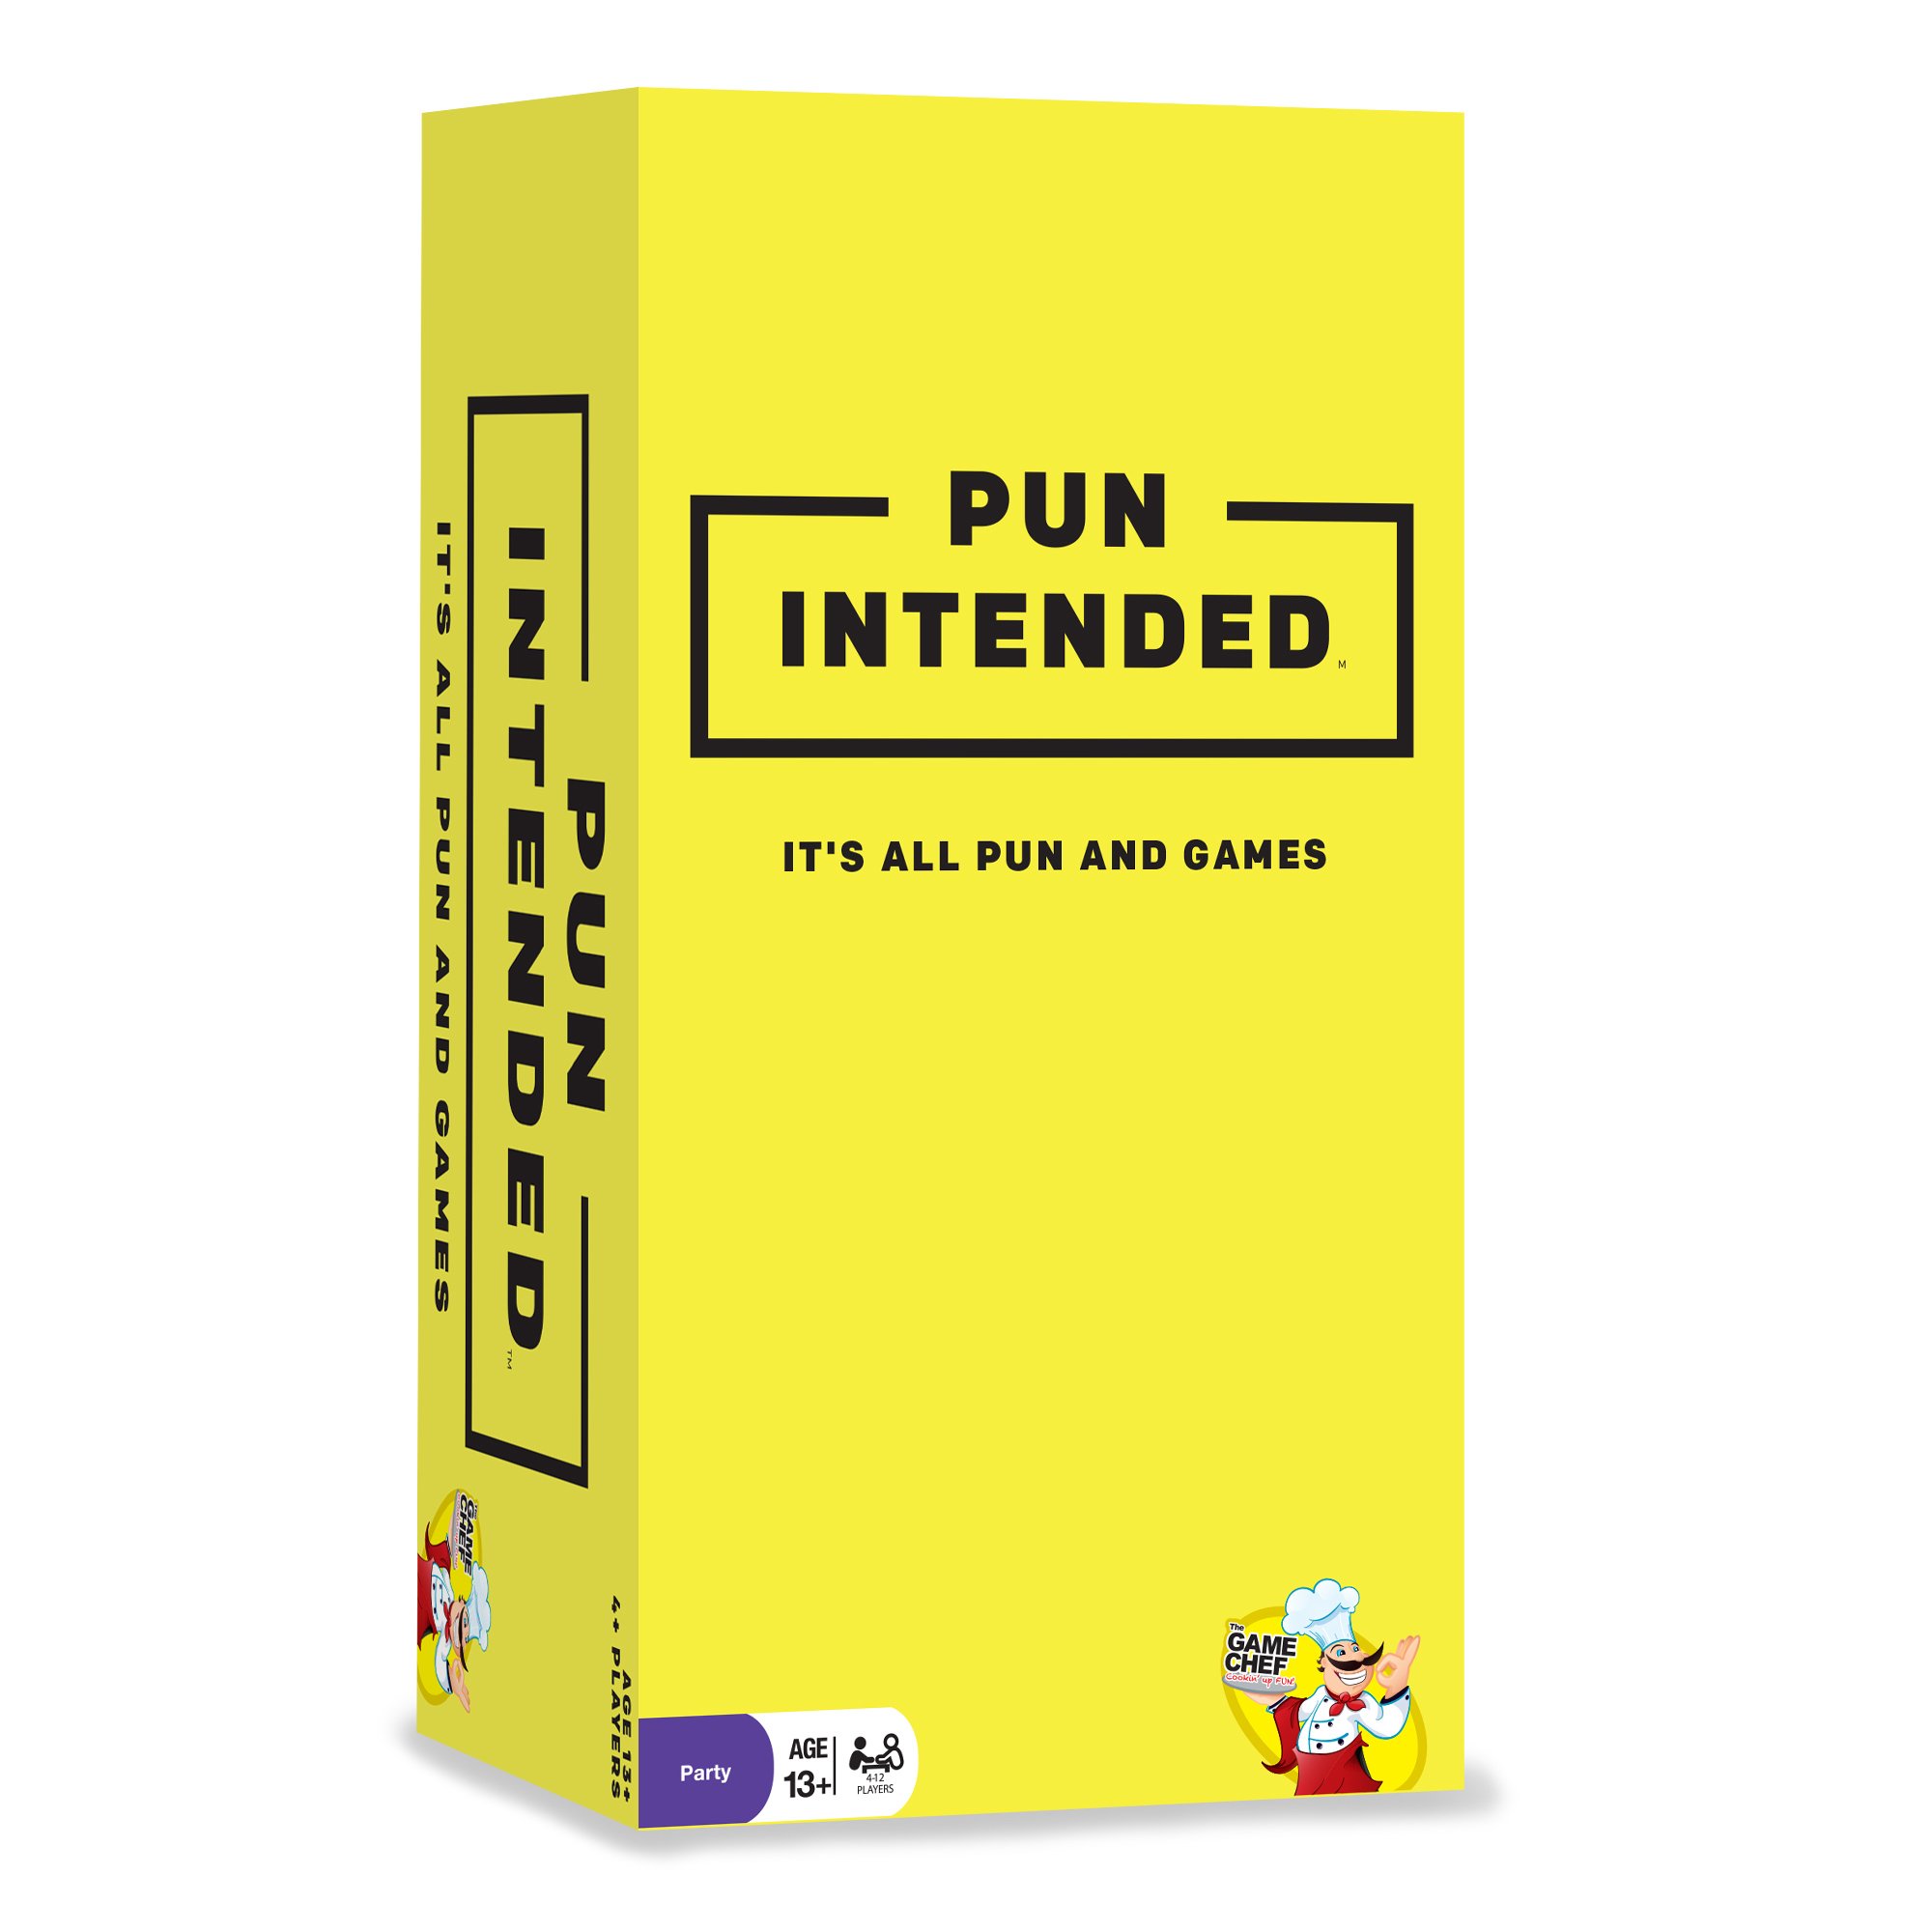 Pun Intended - It's All Pun and Games - Perfect Game for Pun Lovers